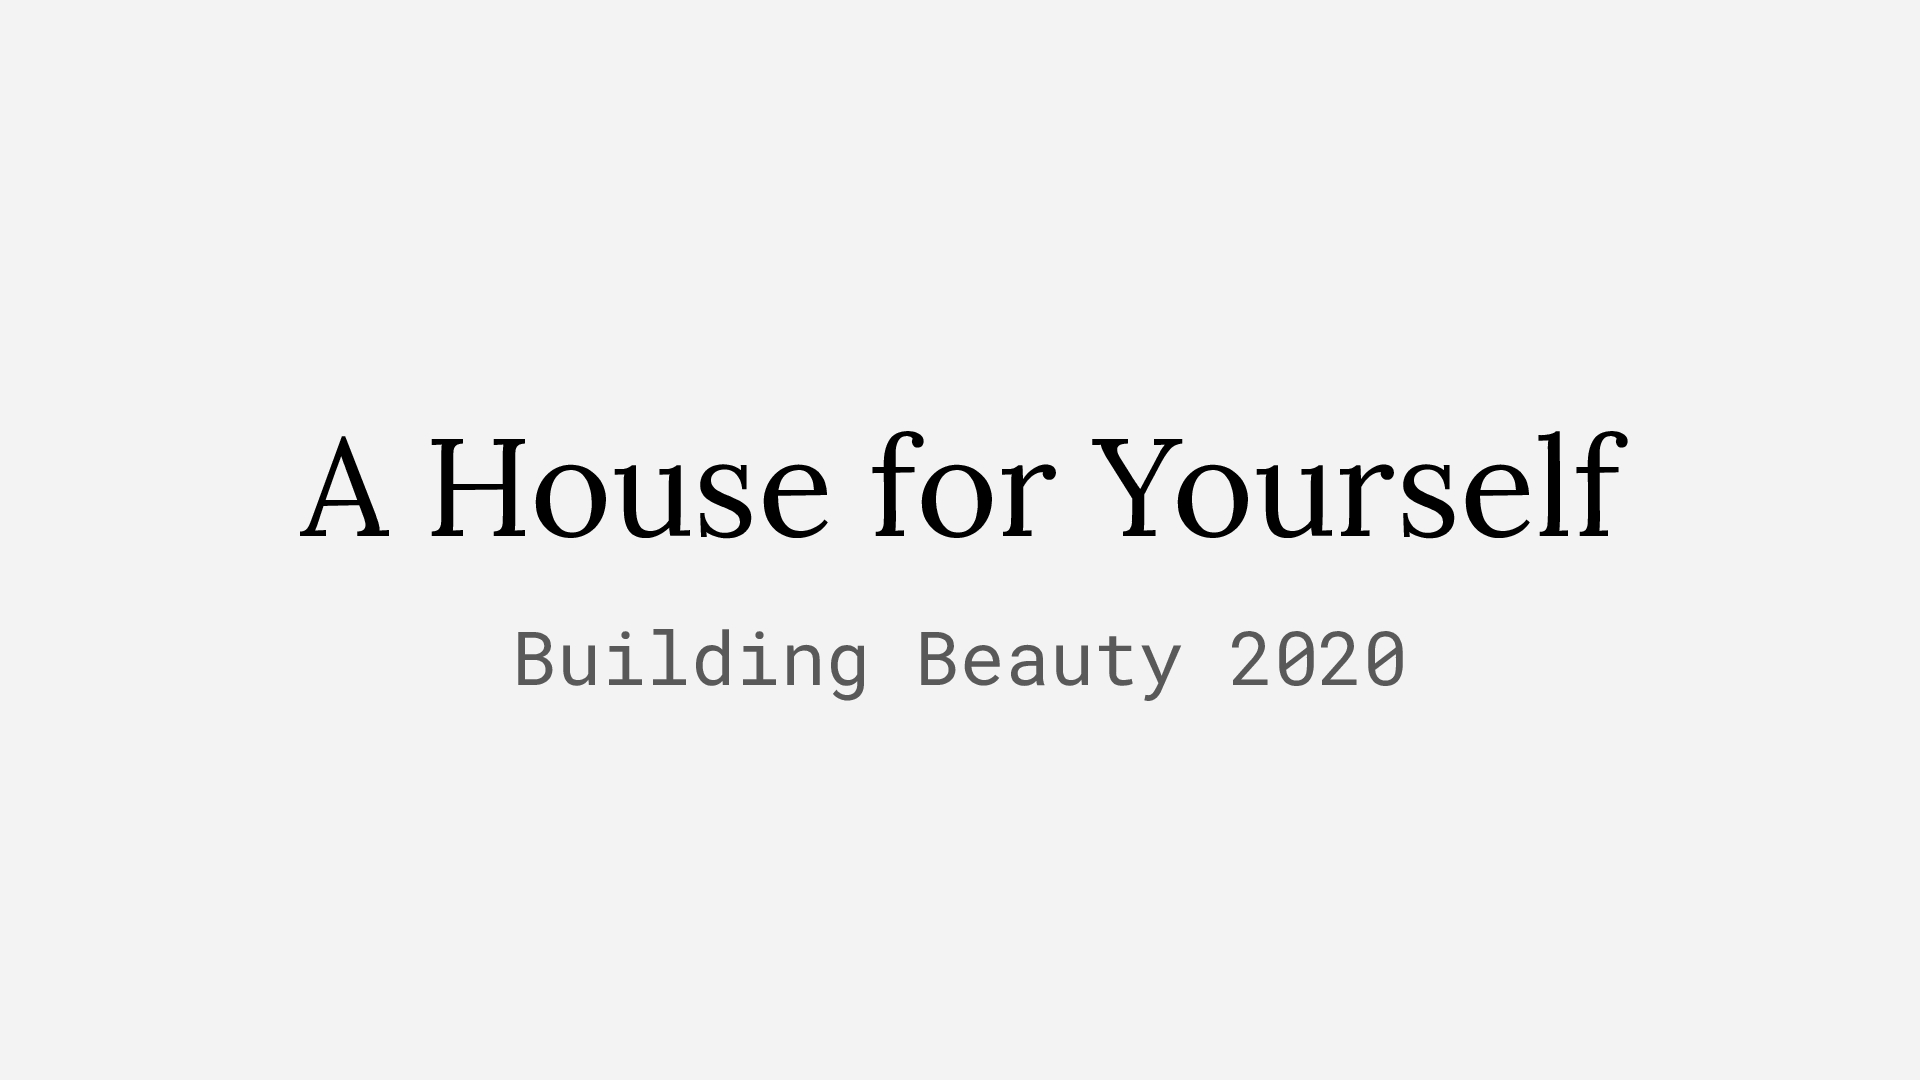 A house for yourself presentation